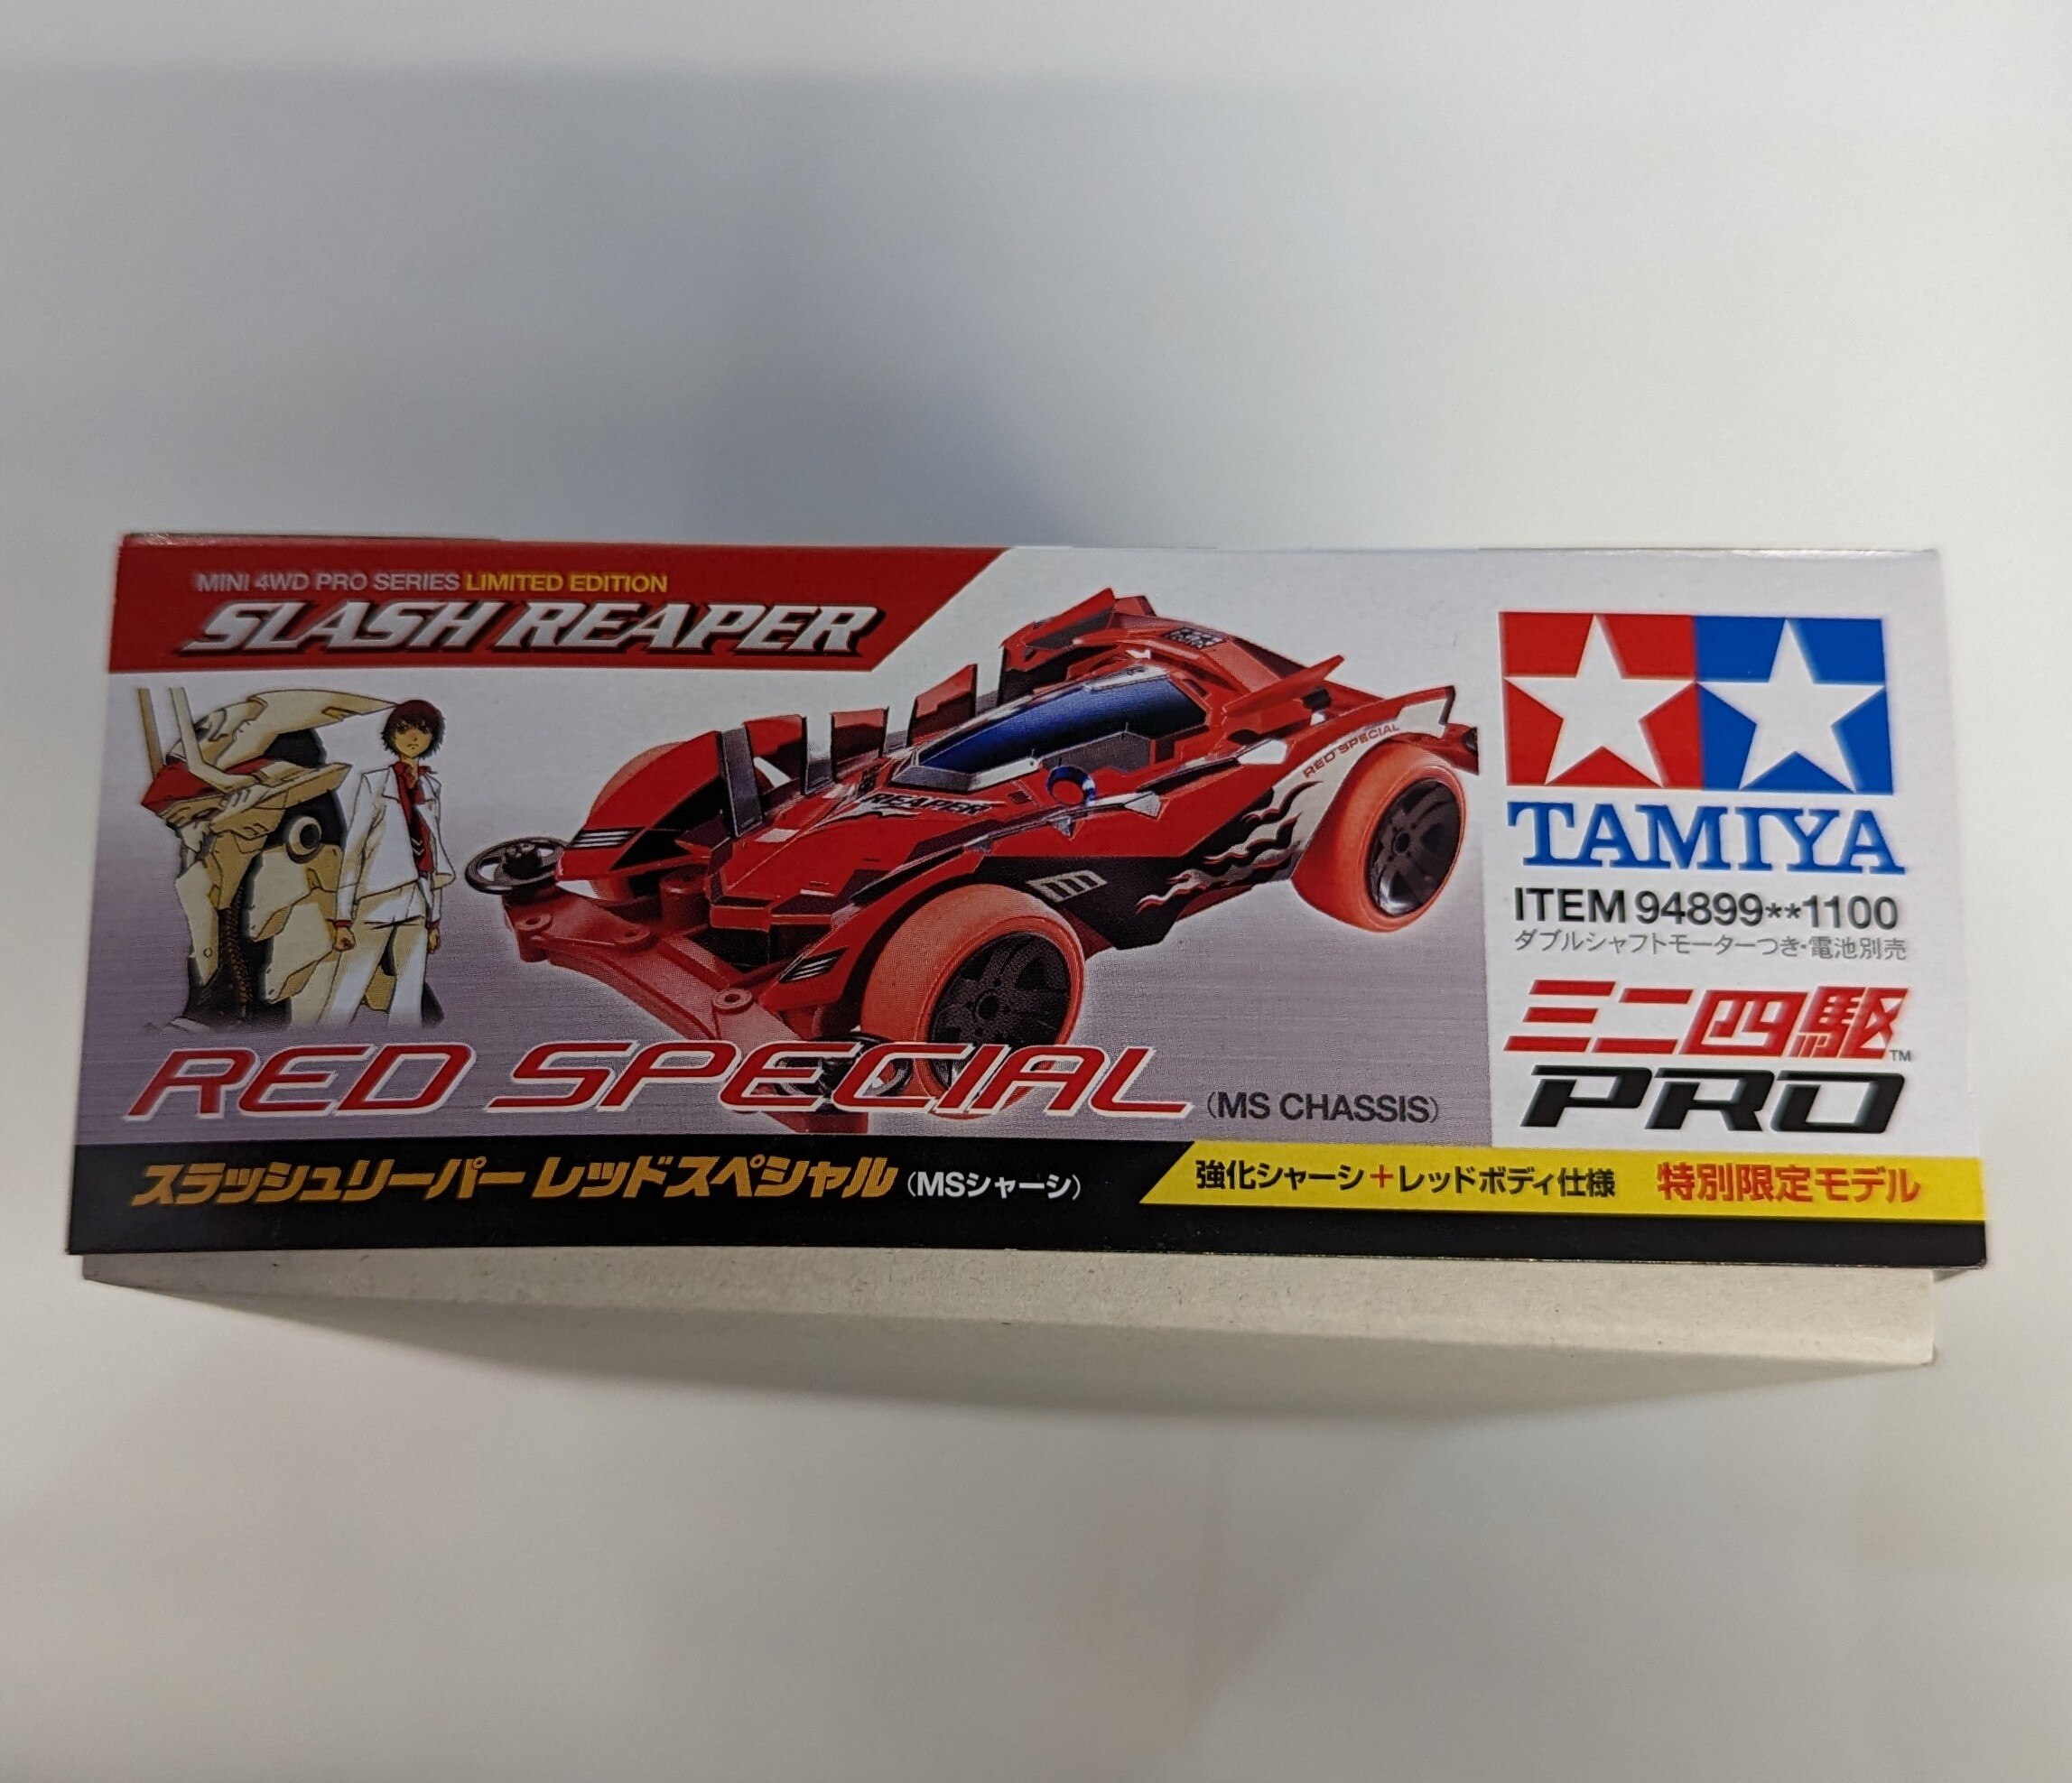 Yamiya Mini 4WD Pro Special Limited Model Slash Reaper Red Special 